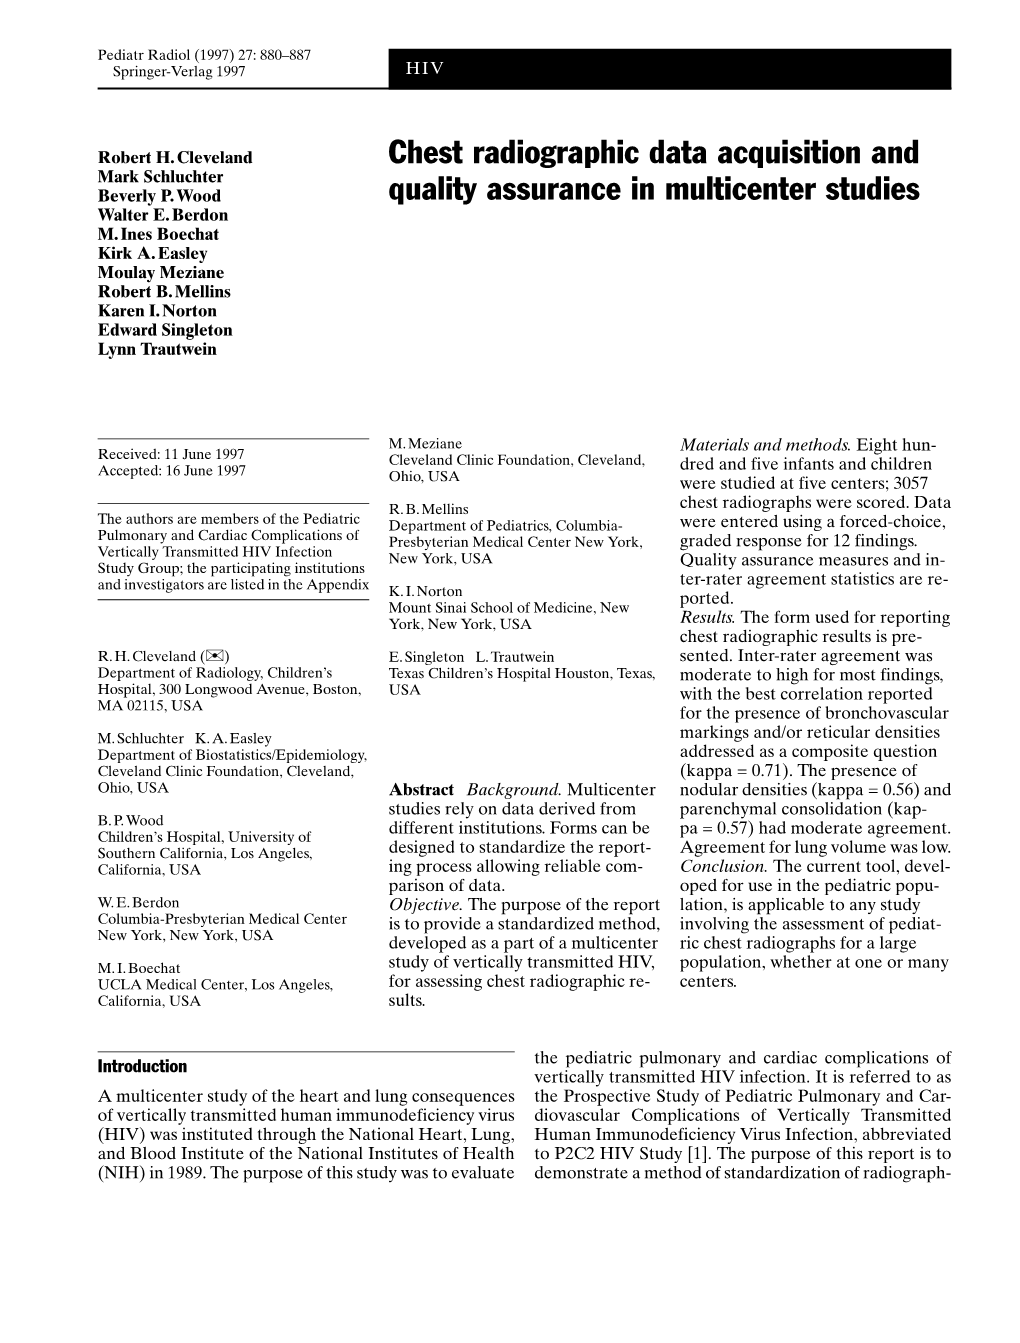 Chest Radiographic Data Acquisition and Quality Assurance In